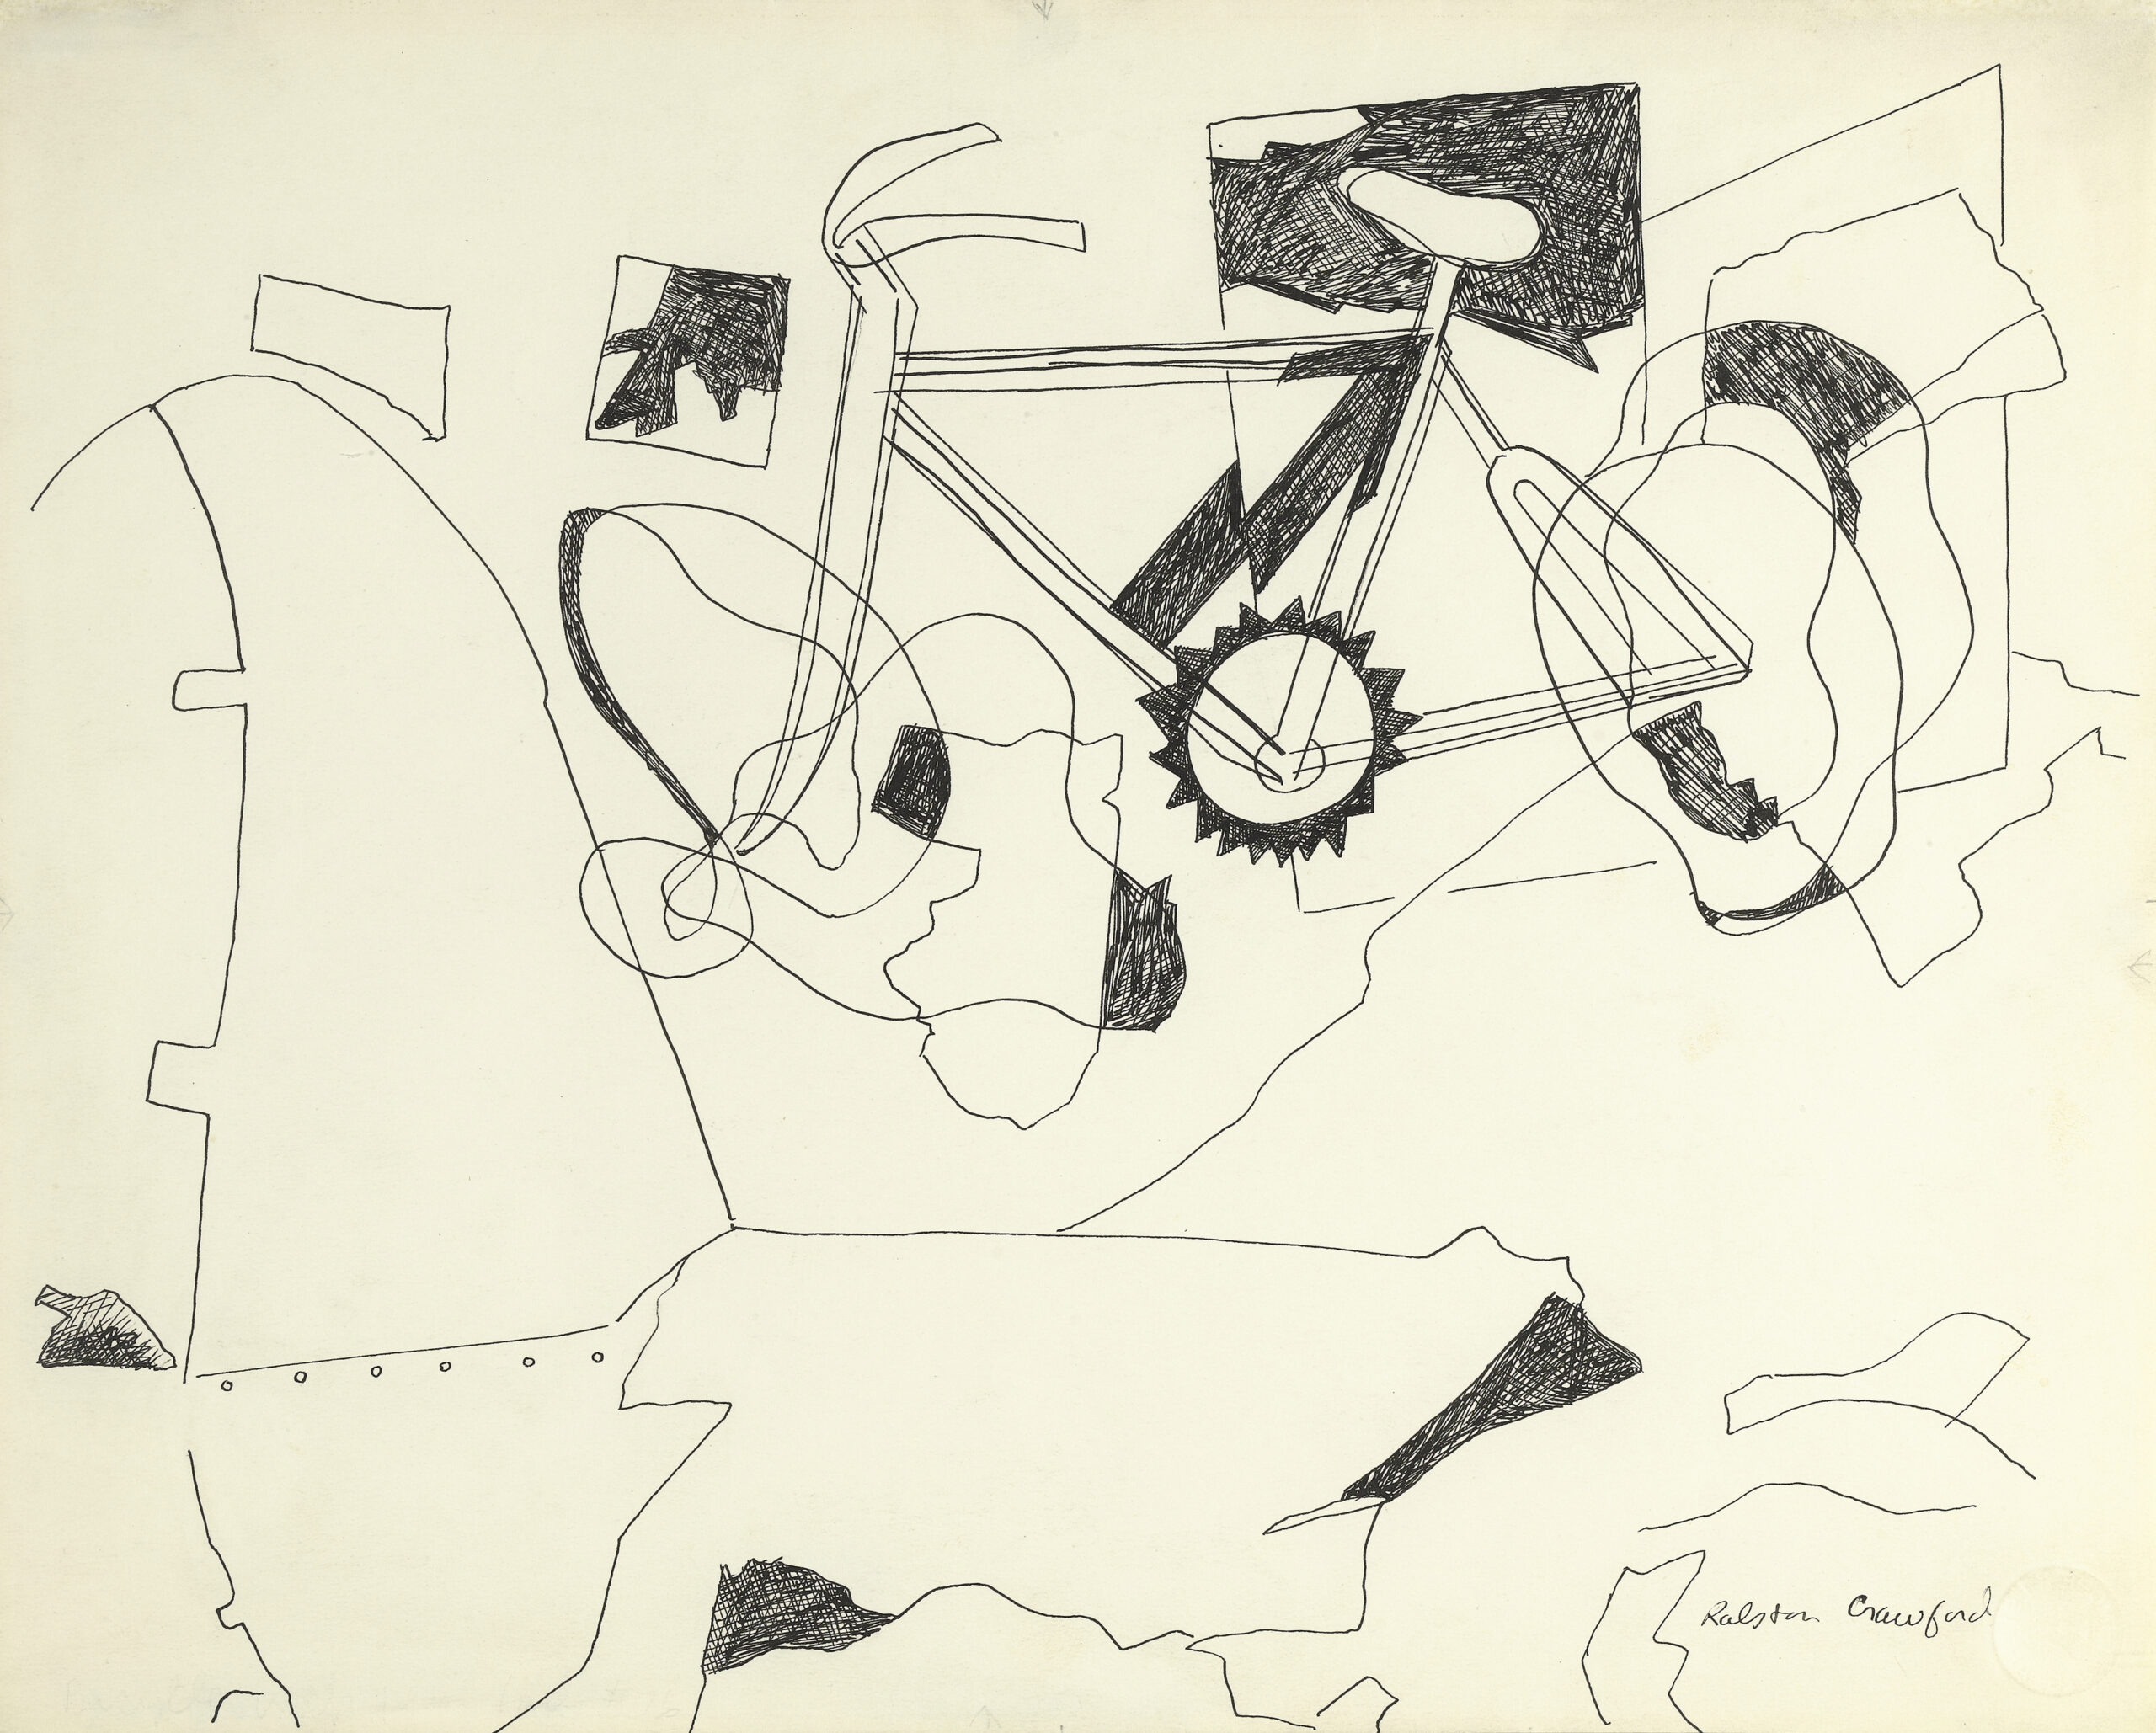 Ink drawing of an airplane crash surrounded by debris including a bicycle with broken wheels.